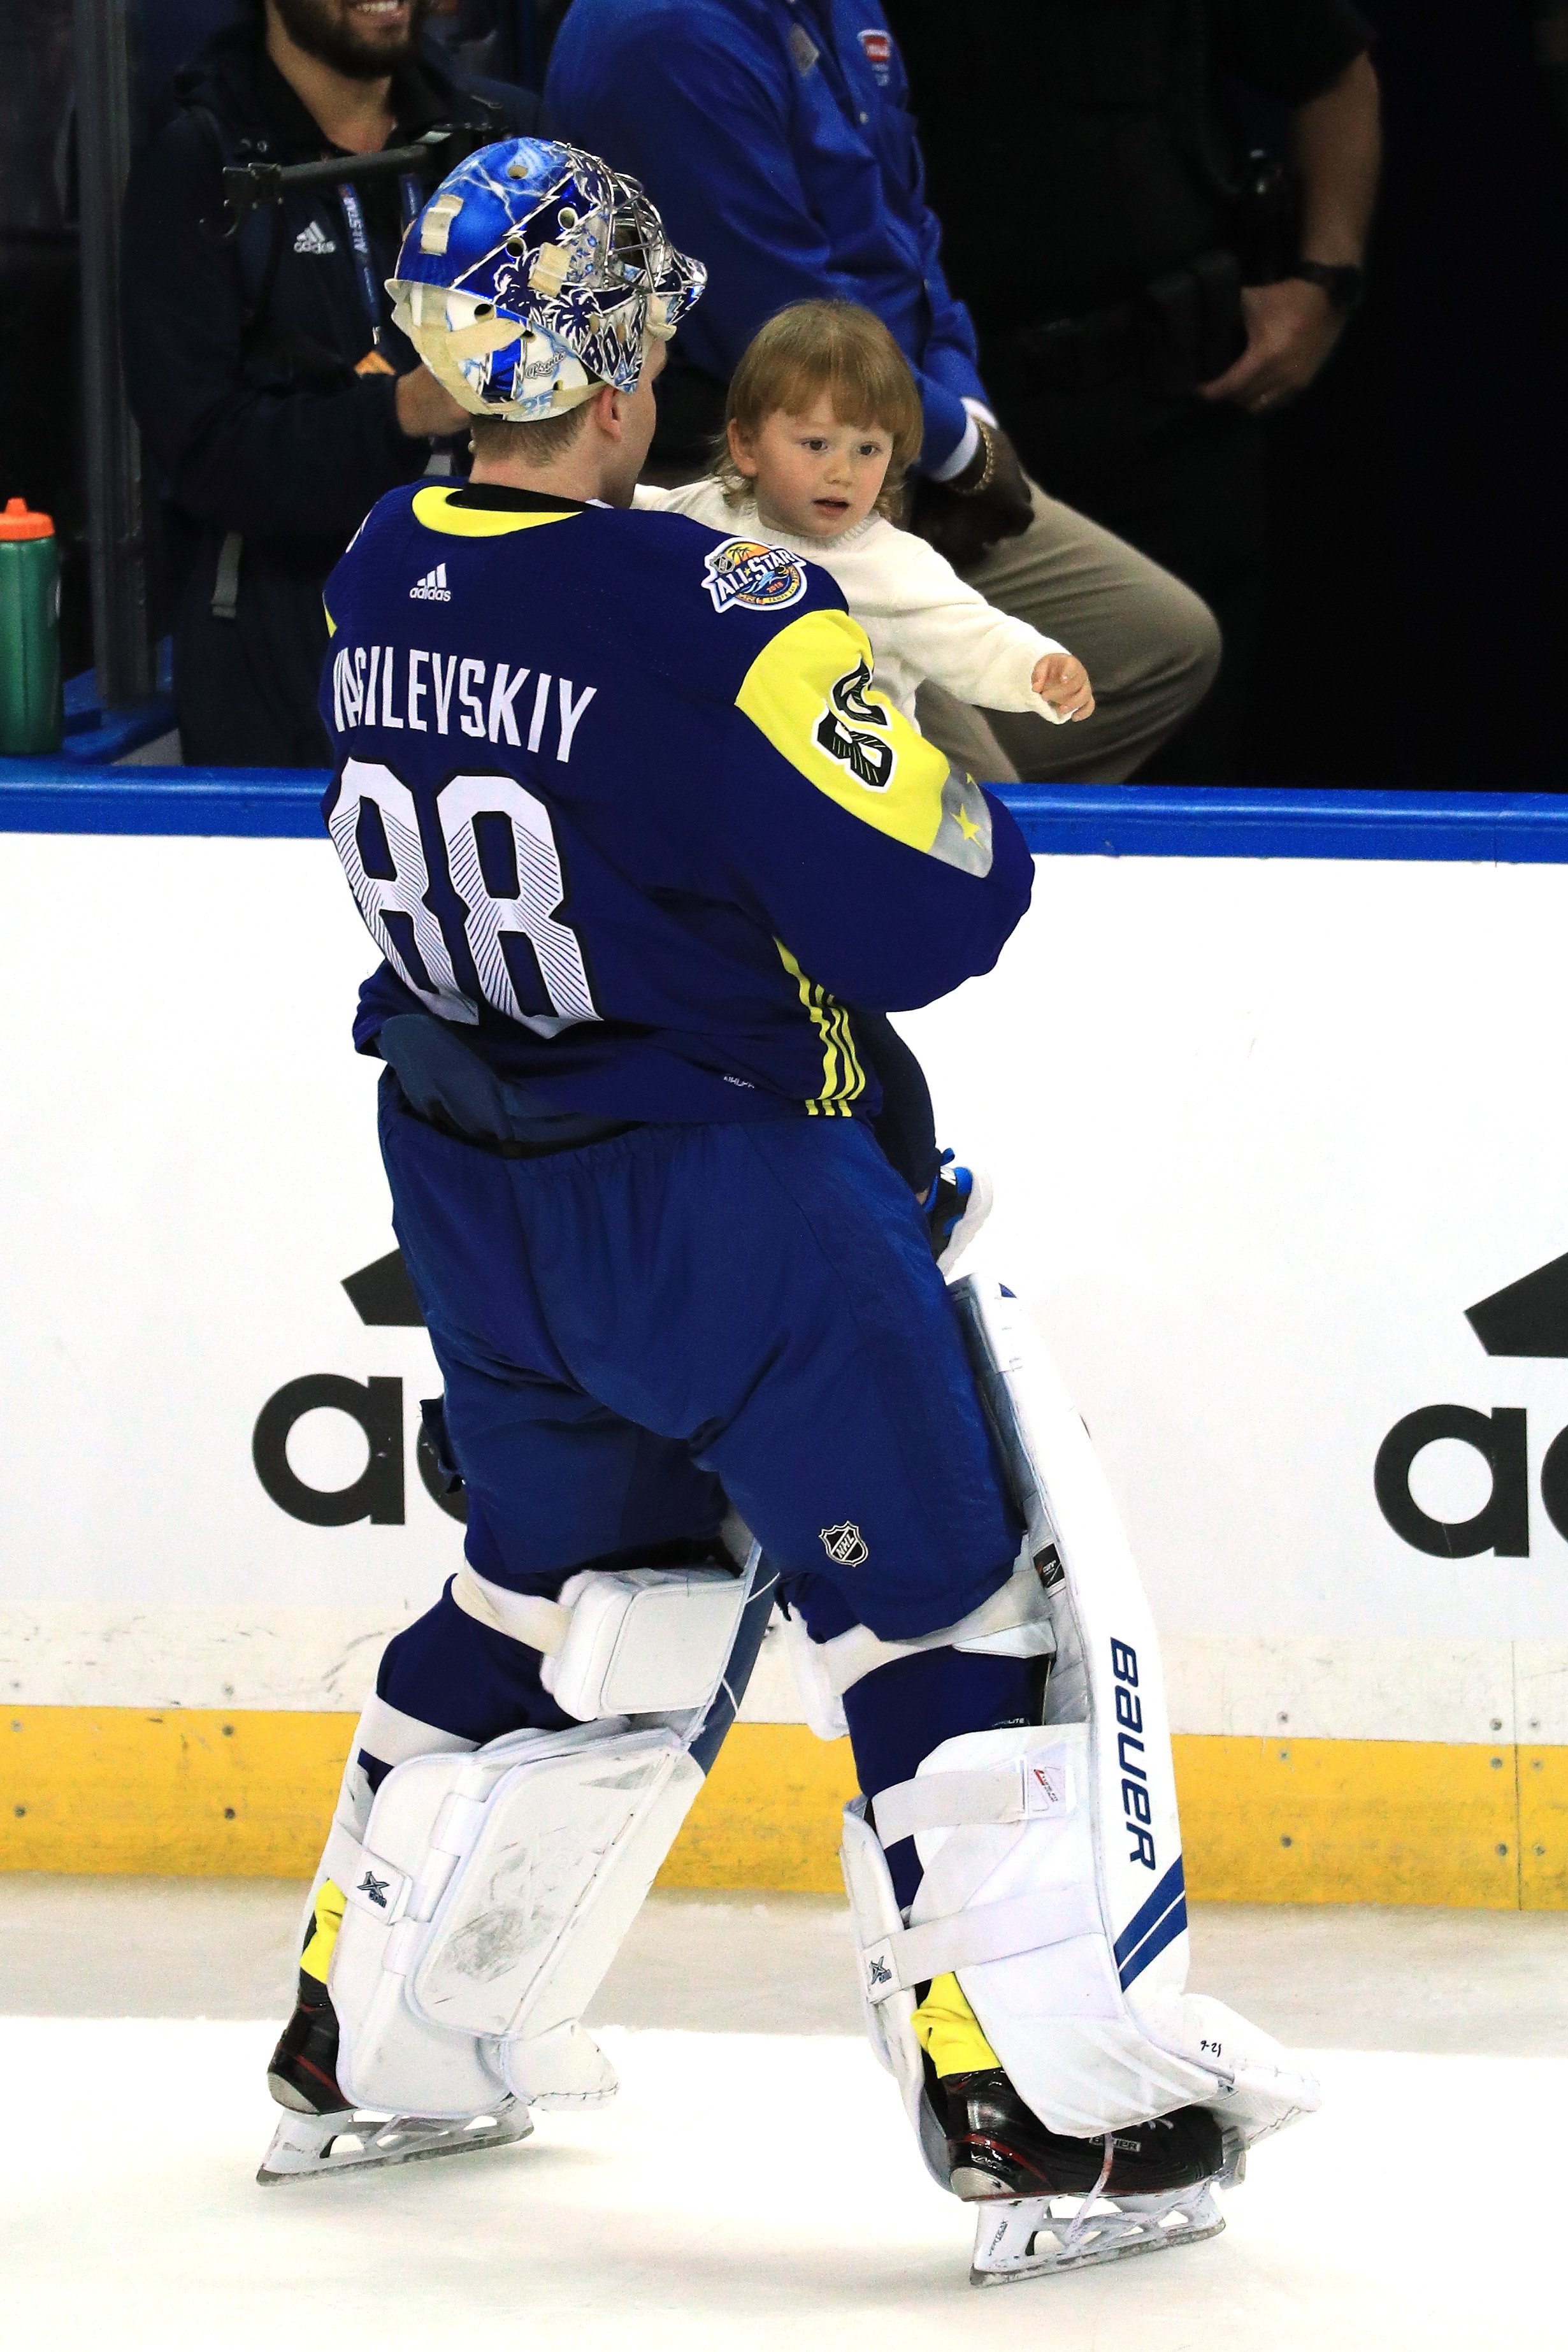 Andrei Vasilevskiy takes his son around the rink after a game